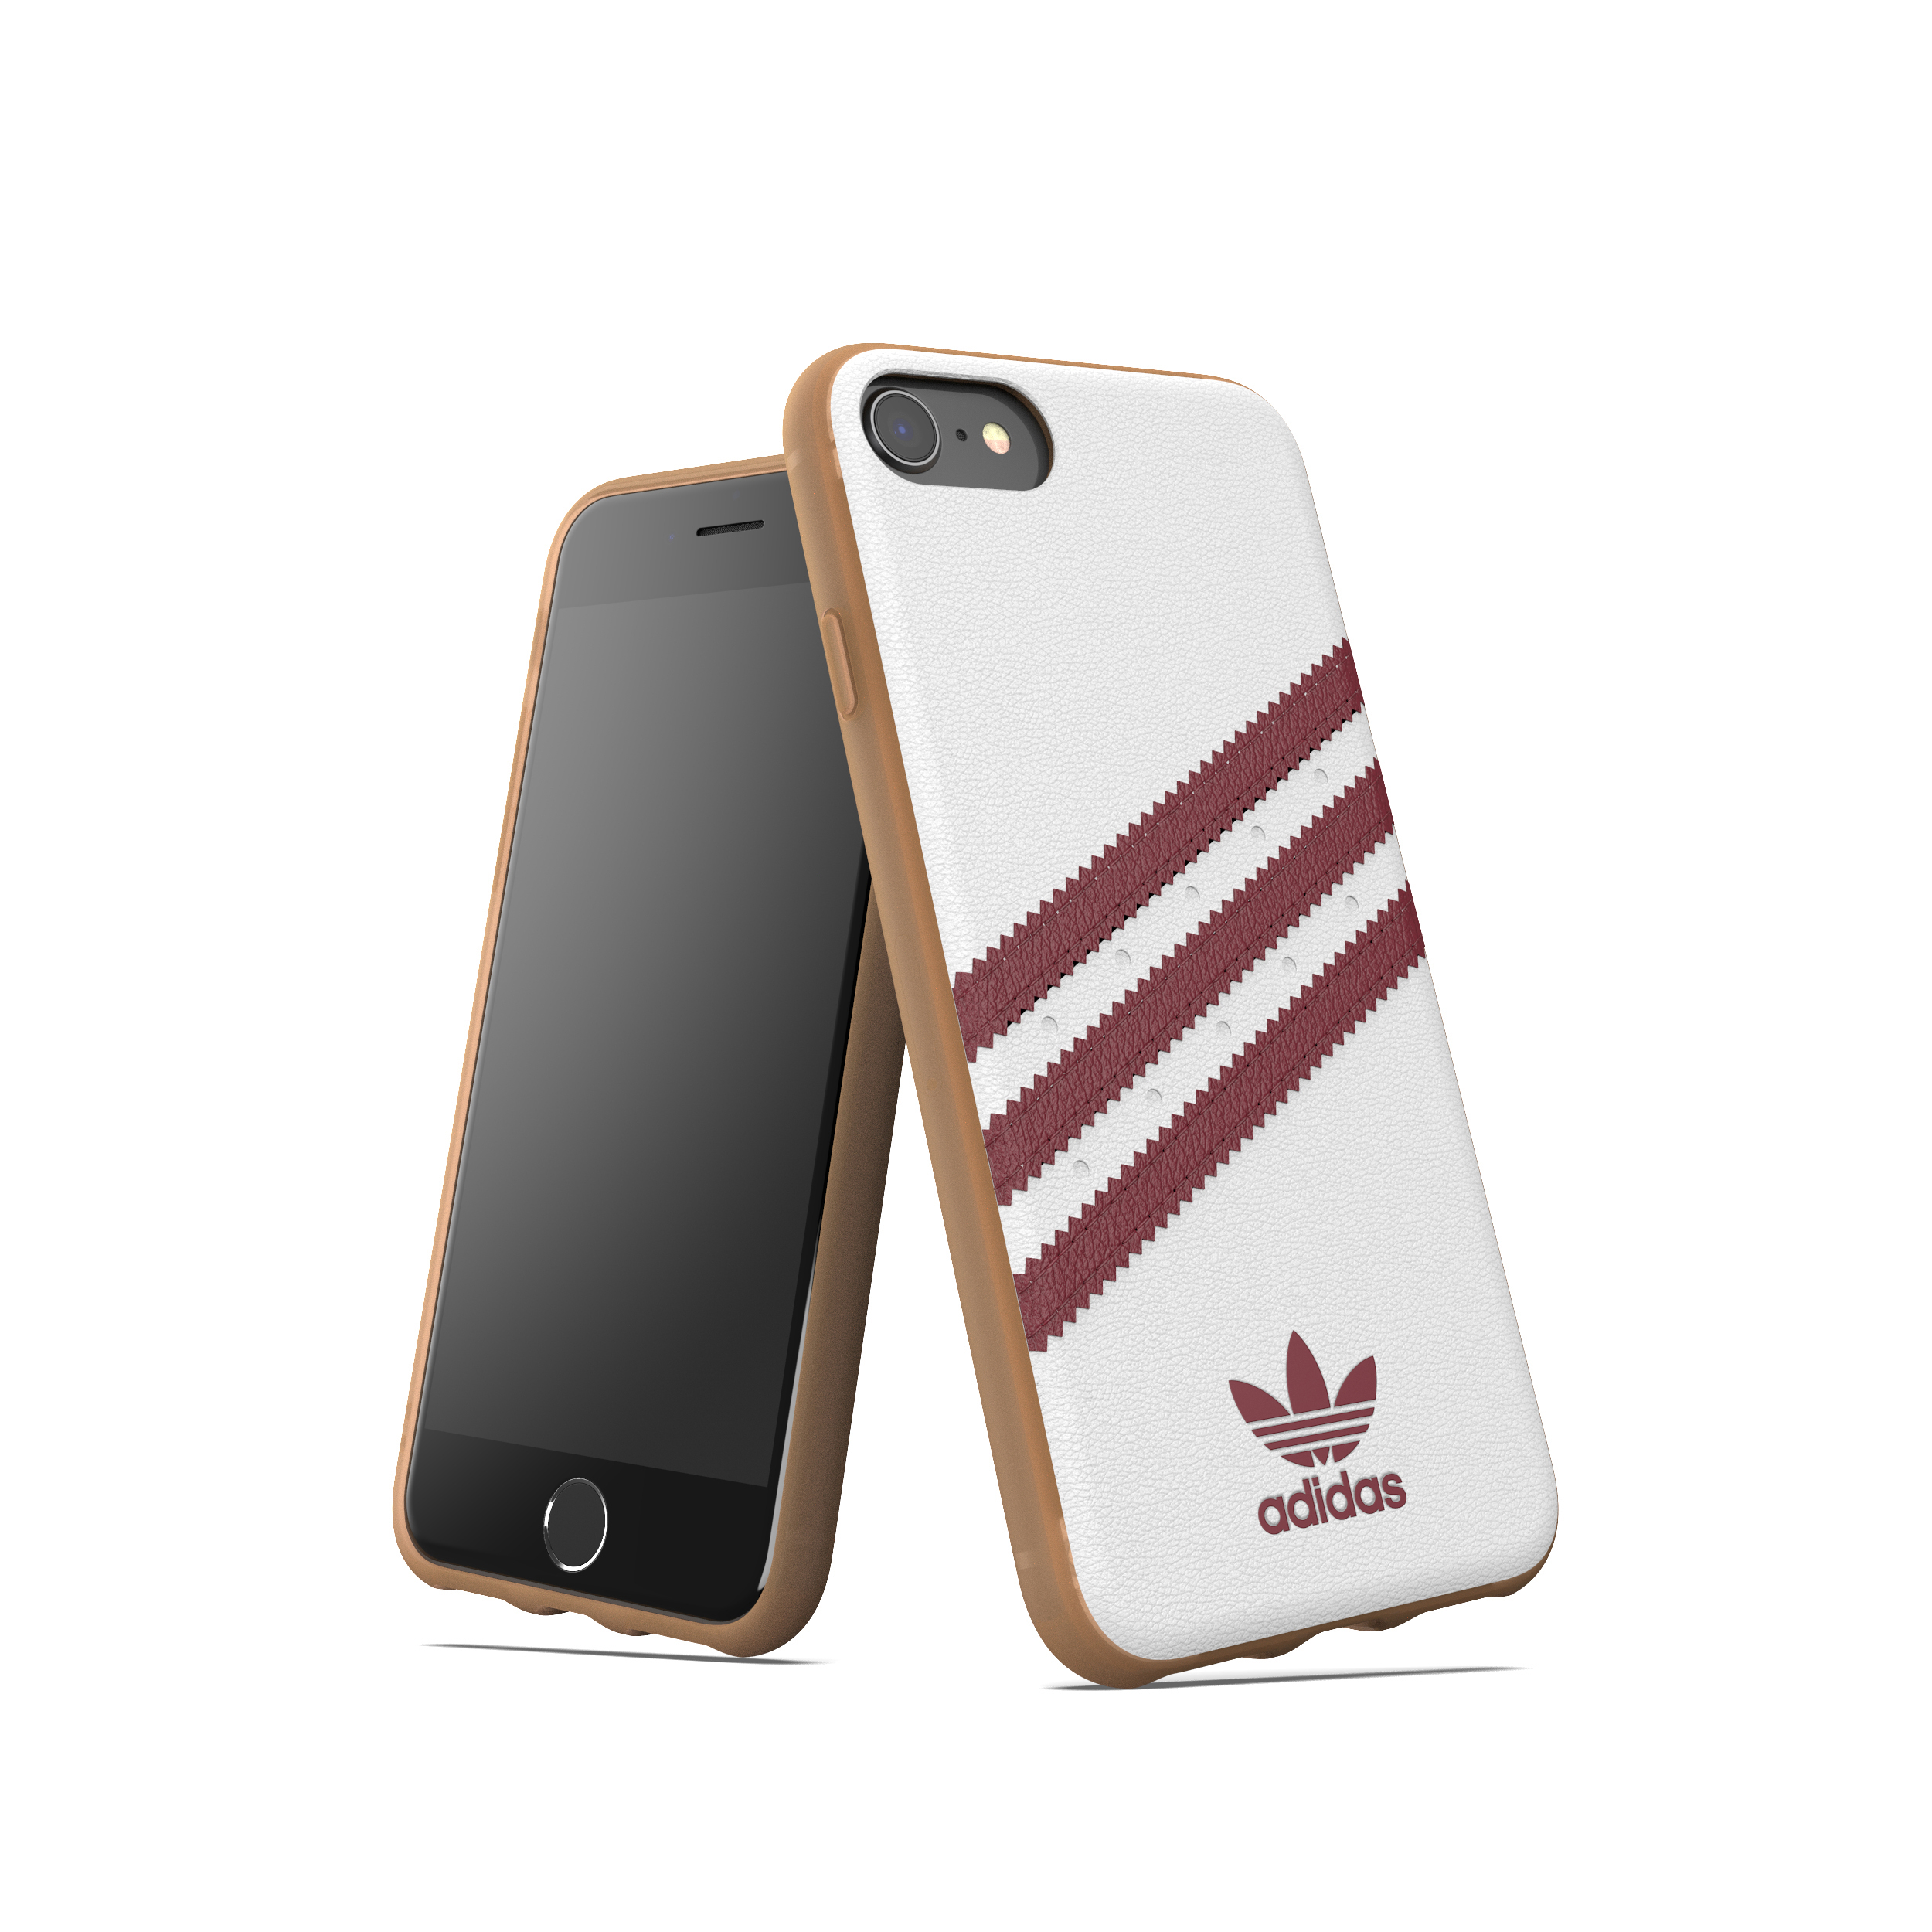 ORIGINALS (2020), OR Backcover, SE iPhone Apple, Moulded iPhone 6, Weiß/Rot iPhone 8, ADIDAS Case, 7, iPhone